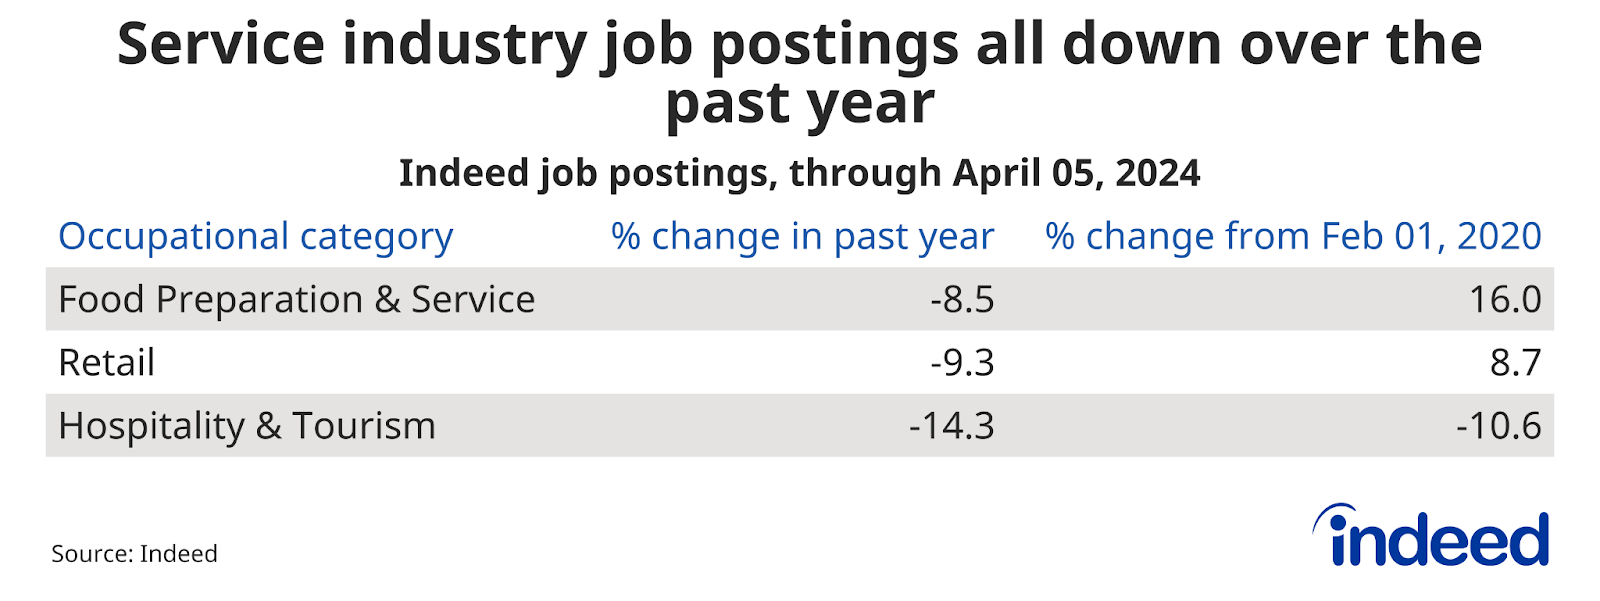 Table showing job posting trends, over the past year through April 5, 2024, and from the pre-pandemic baseline, for several Retail occupations. Food Preparation & Service job postings decreased 8.5% over the past year but remained up 16% from their pre-pandemic baseline.